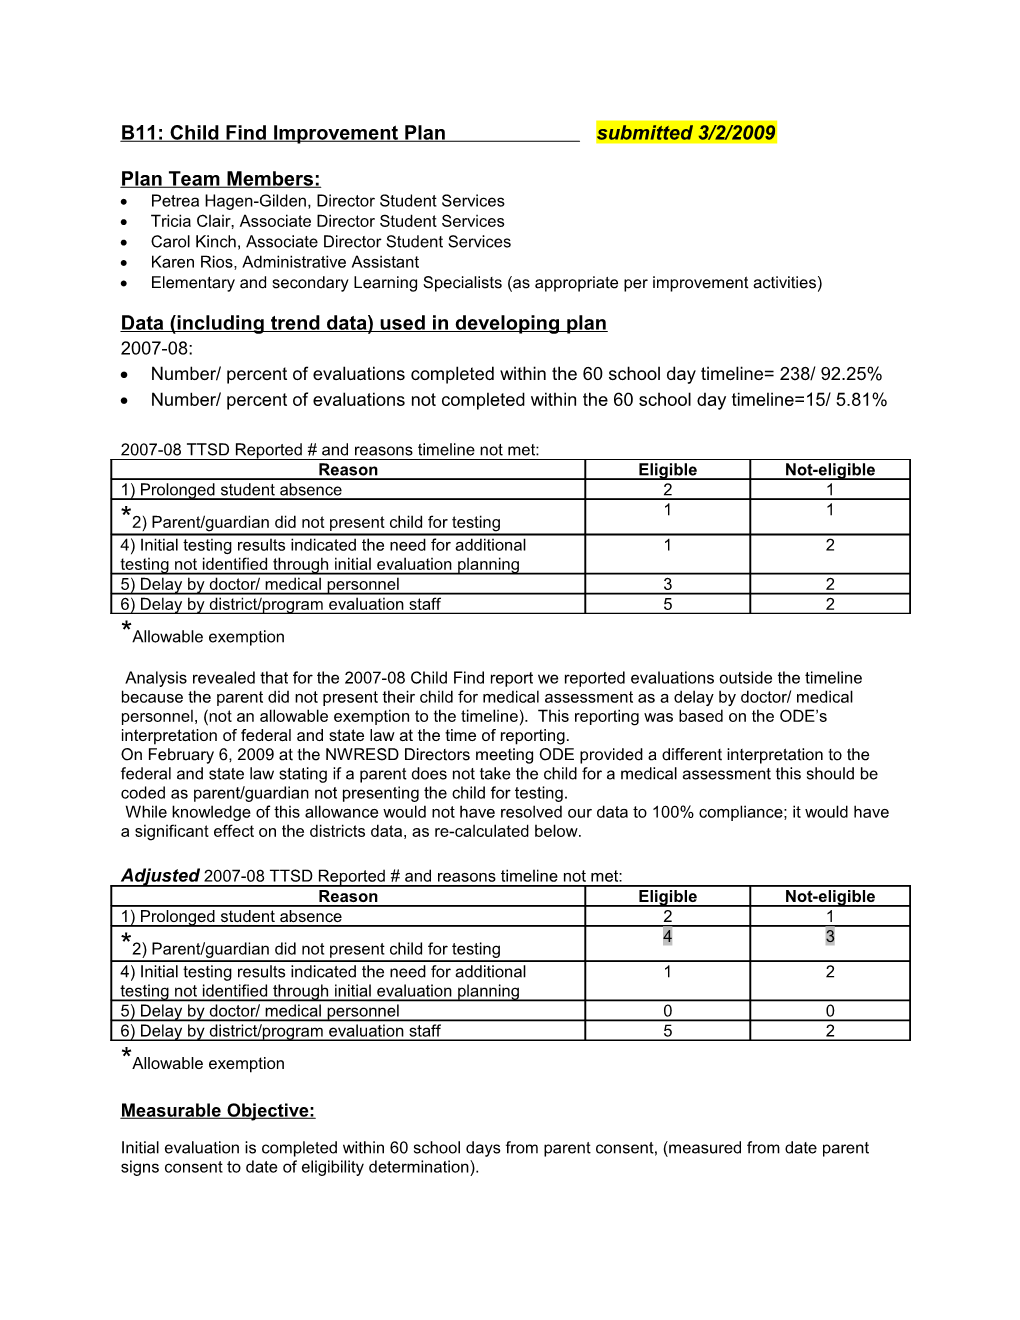 B11: Child Find Improvement Plan Submitted 3/2/2009